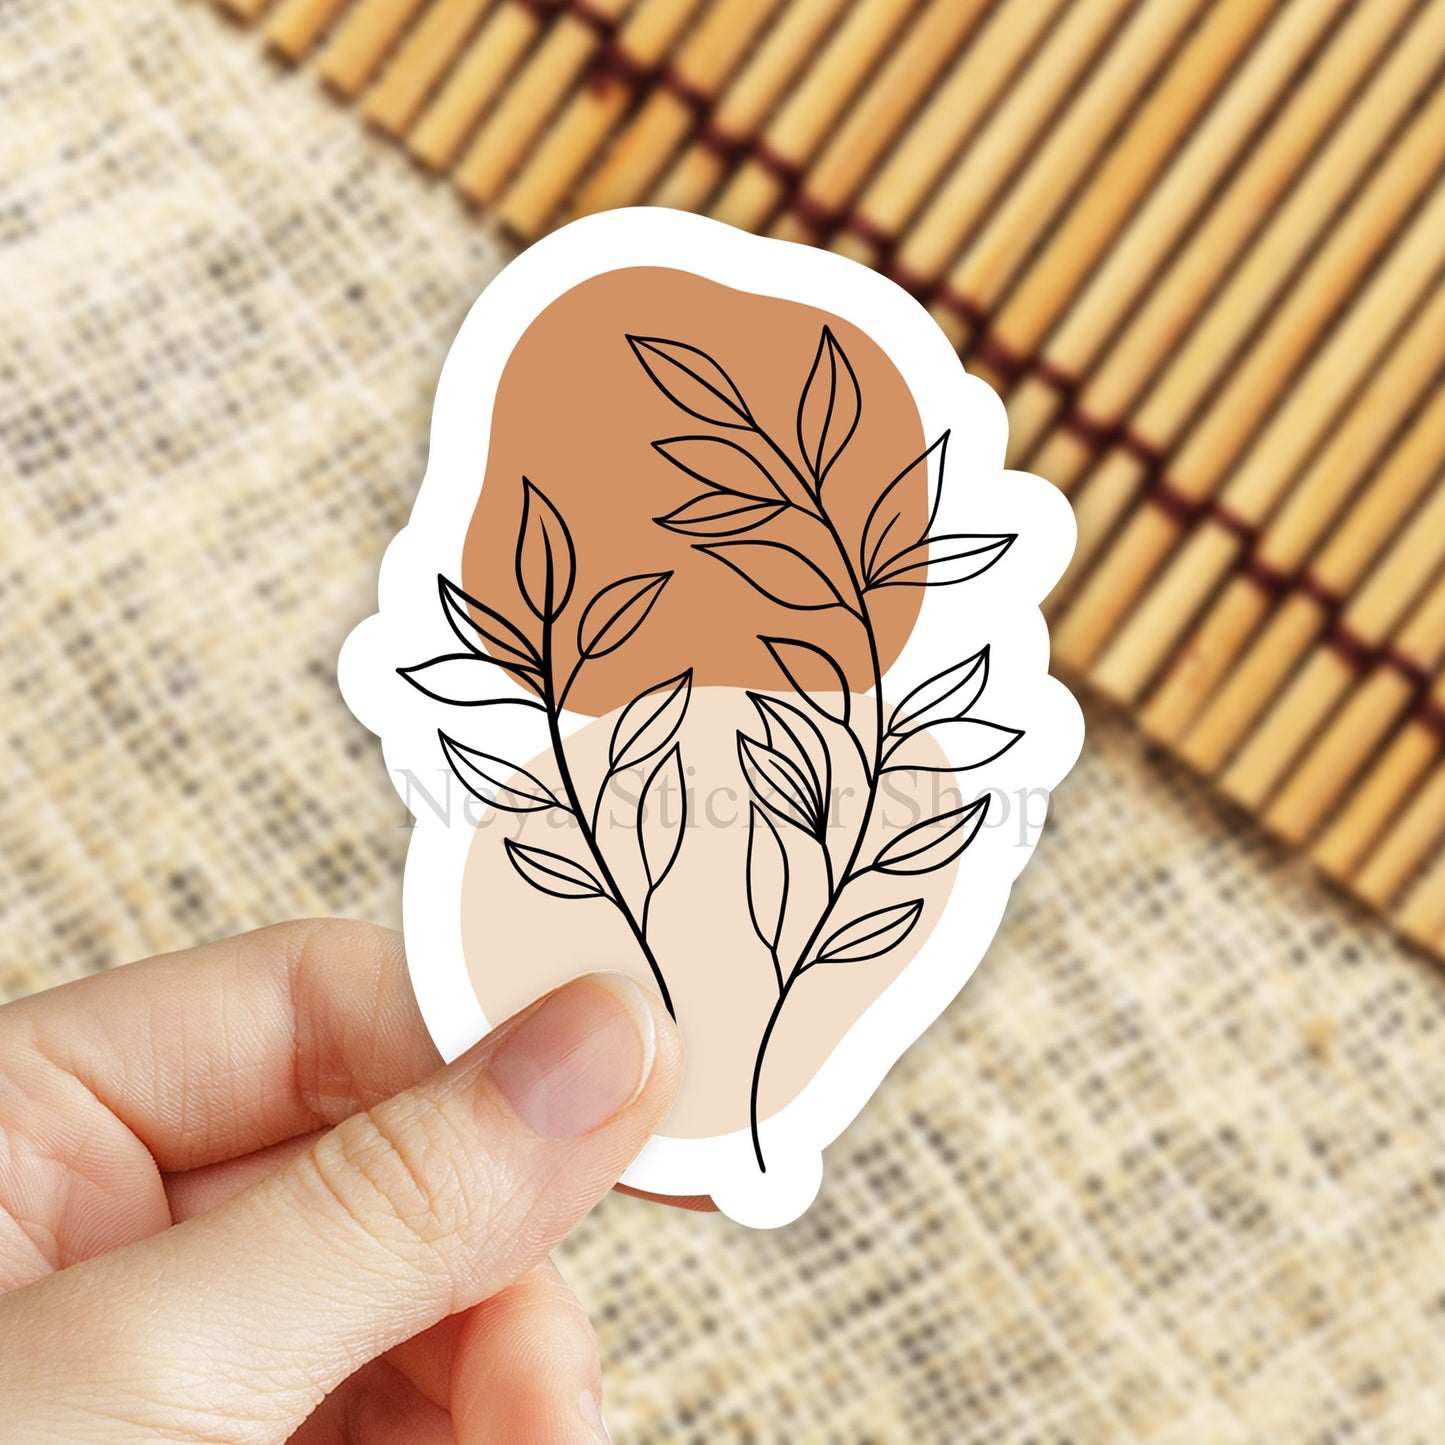 boho Floral leaf Sticker, Cute Stickers, Laptop Stickers, Waterbottle Stickers, Sticker Decals, trending Stickers, abstract floral sticker